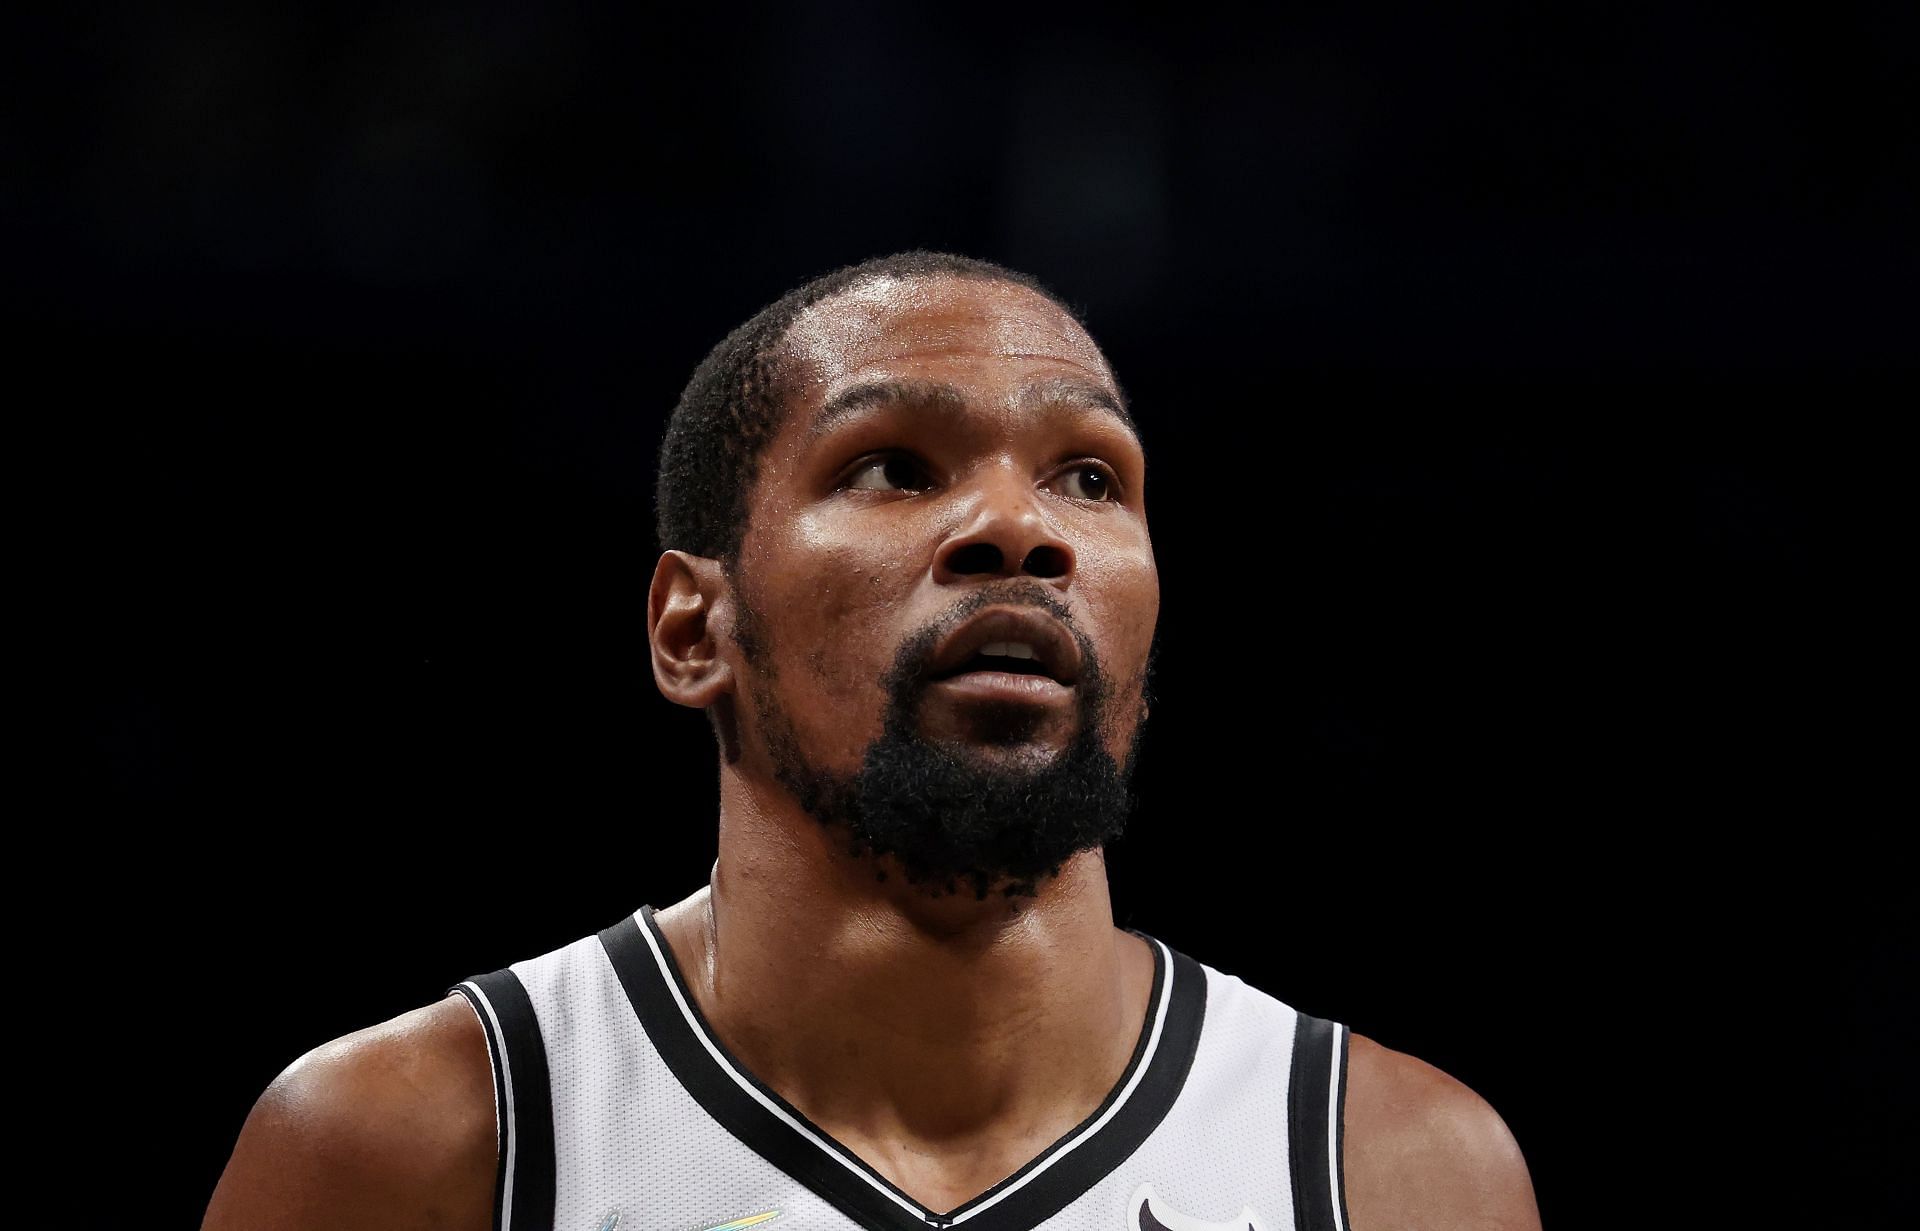 Kevin Durant had 37 points as the Brooklyn Nets beat the Utah Jazz 114-106 on Monday